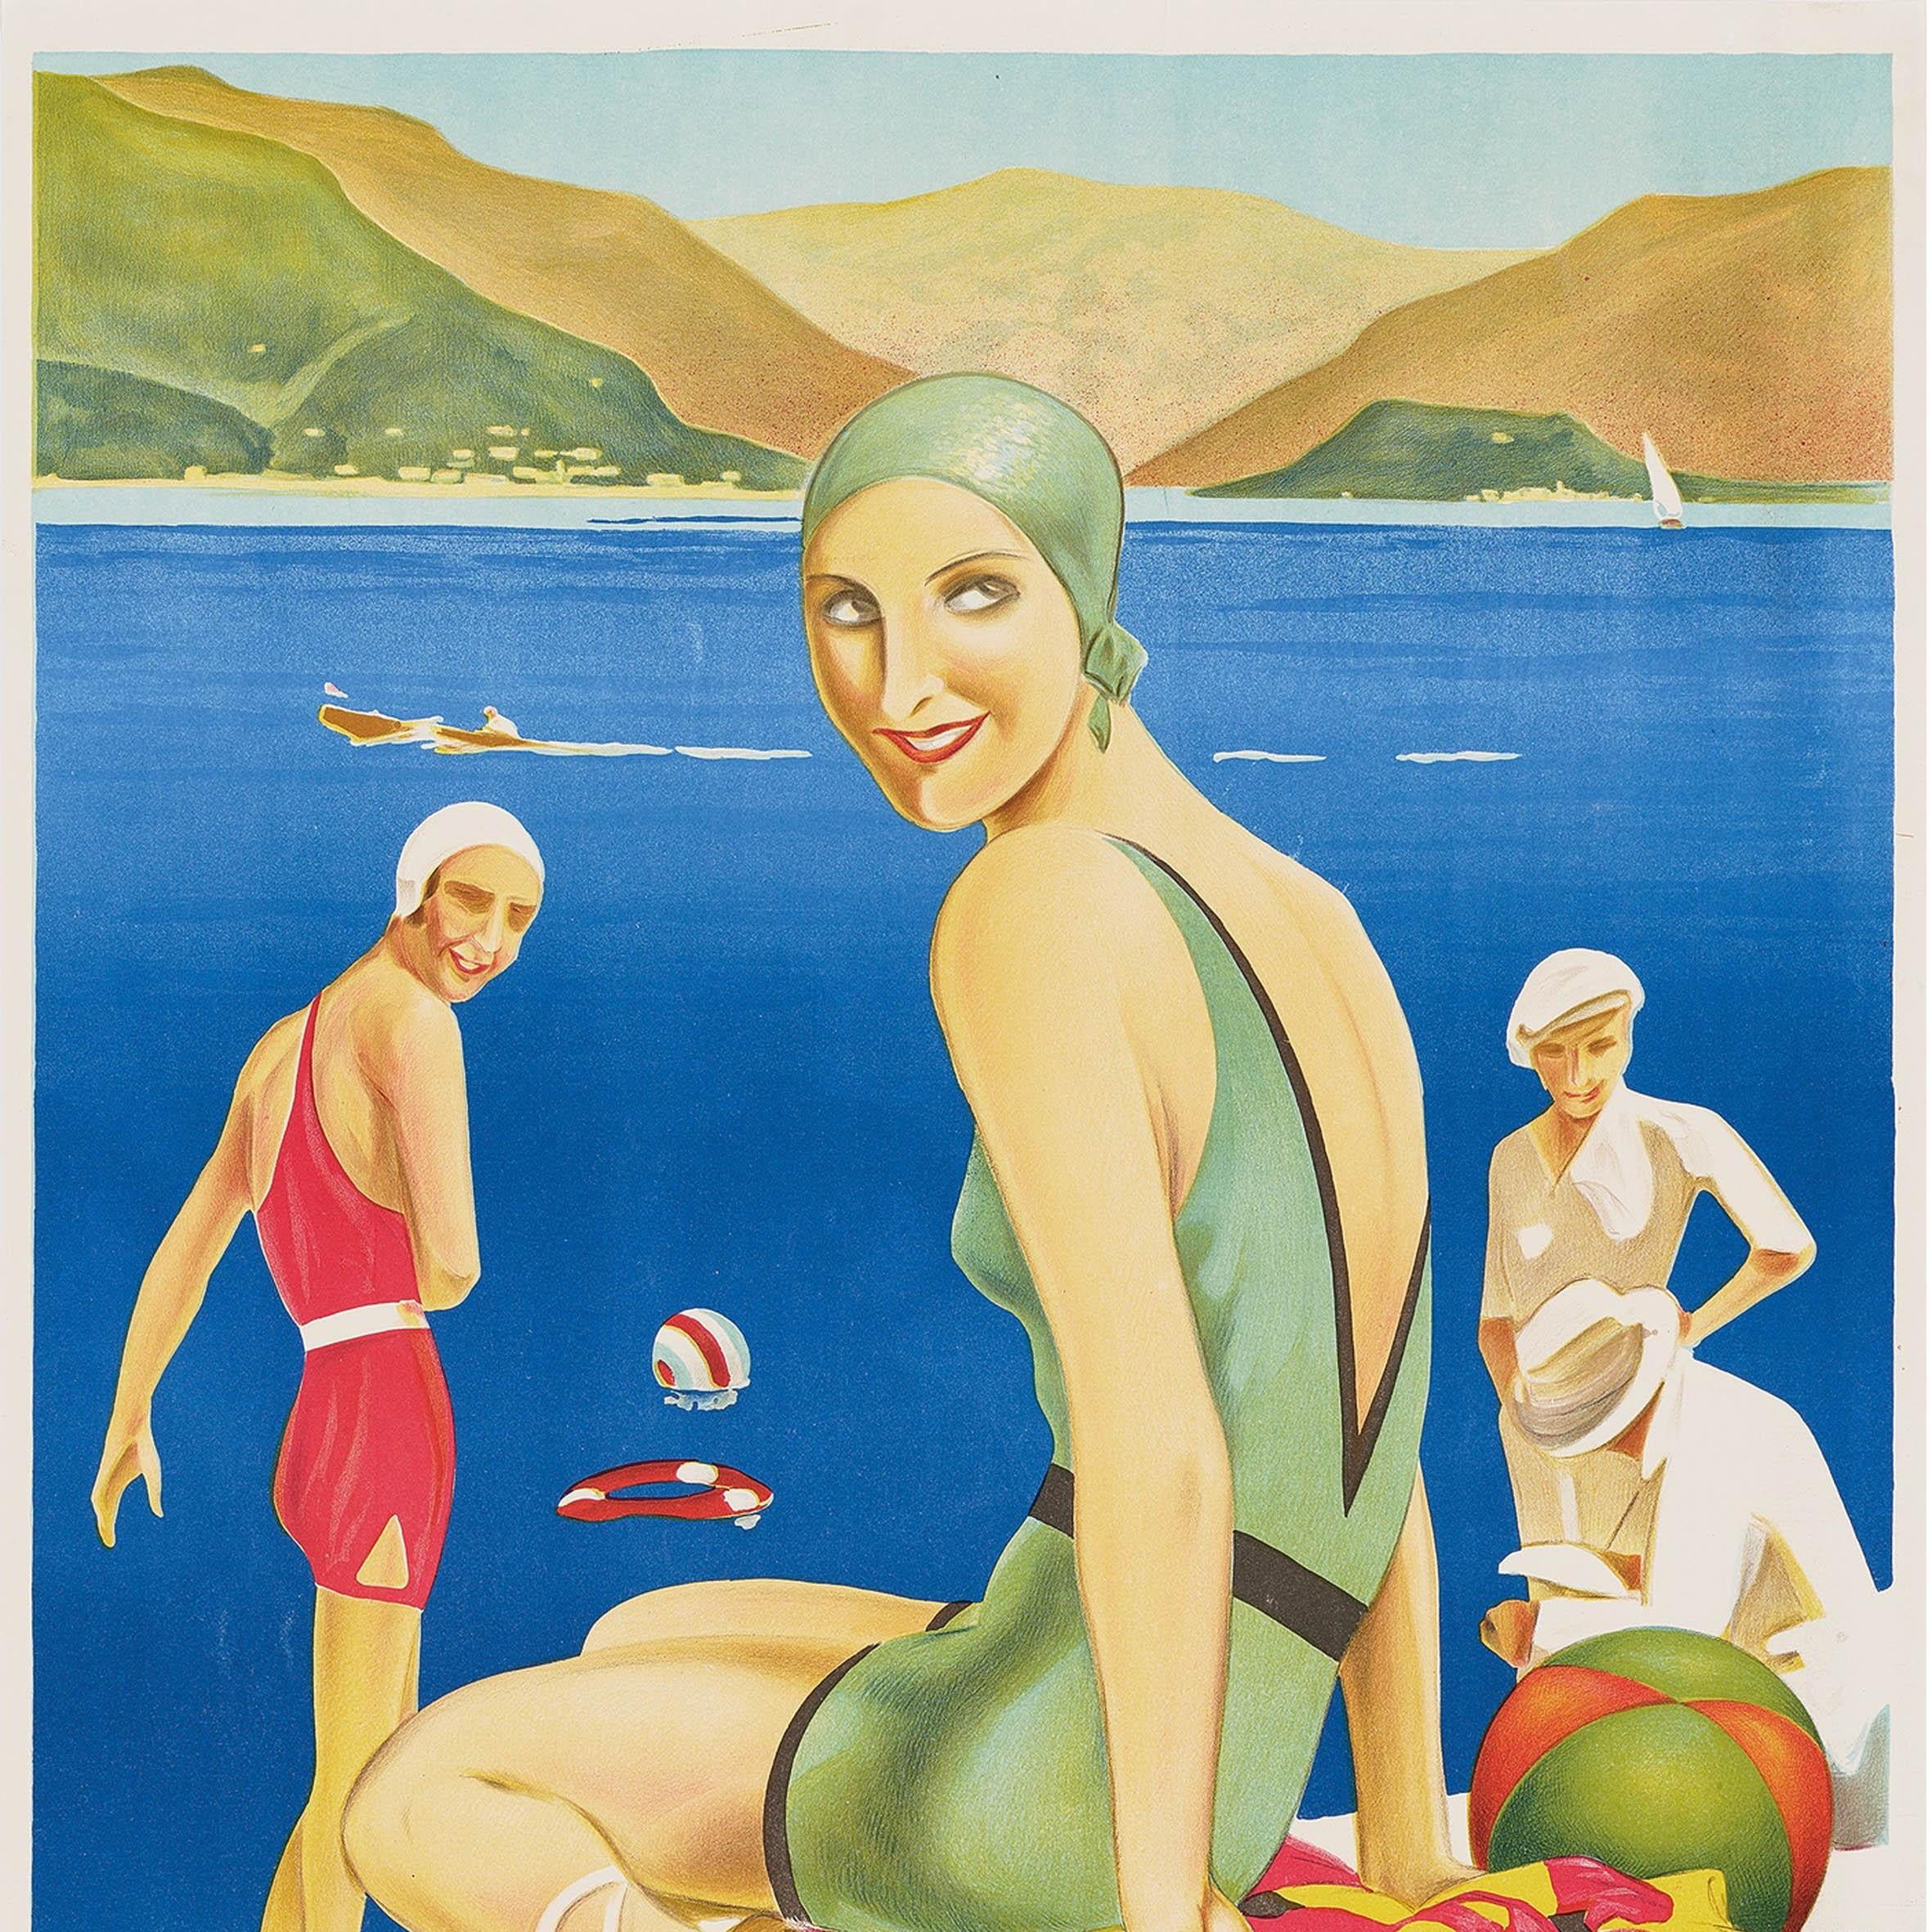 Original vintage travel poster for Comersee Italien / Lake Como Italy featuring a stunning Art Deco scene of people in fashionable summer clothing and elegant swimming costumes in the foreground, a lady sitting on a colourful towel next to a beach